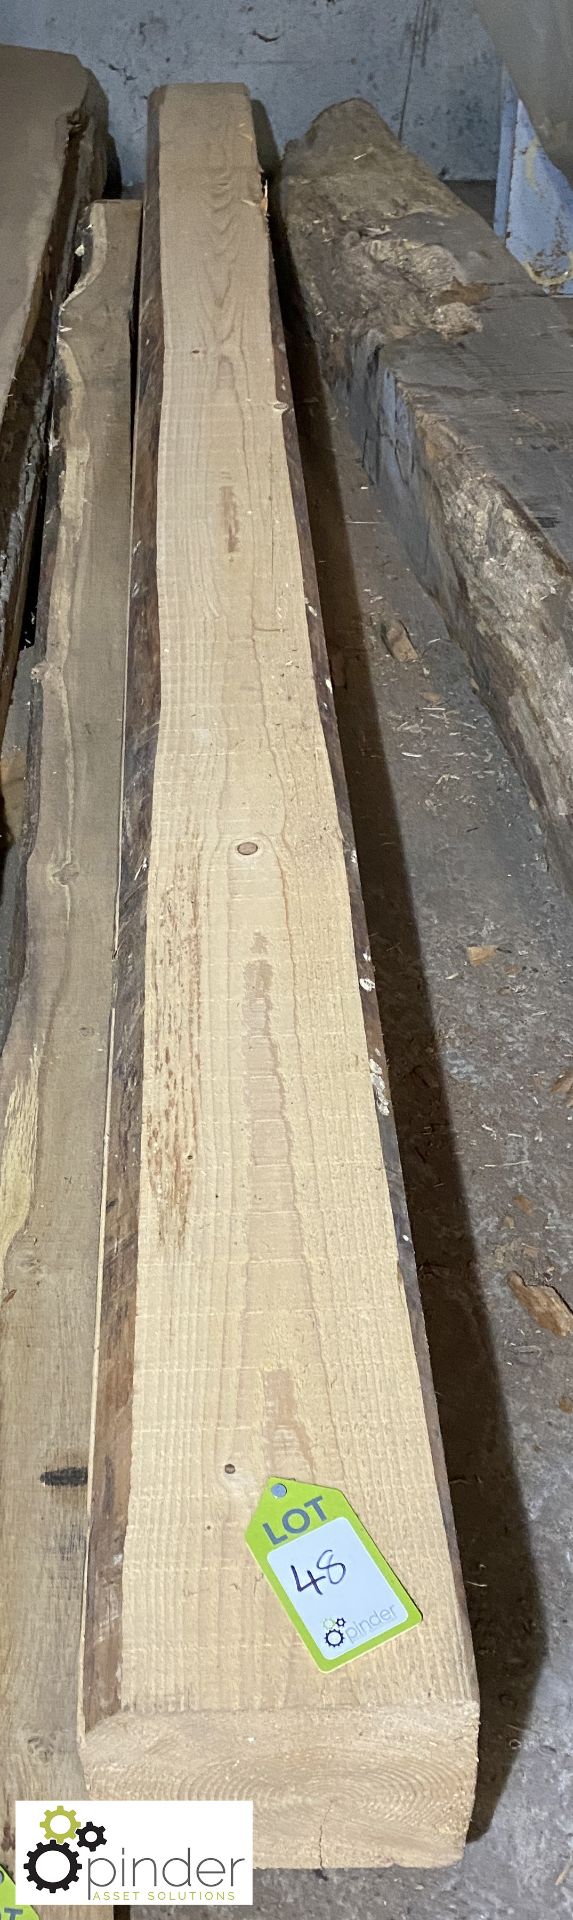 Air dried Pine Beam, 3720mm x 220mm x 220mm - Image 2 of 4